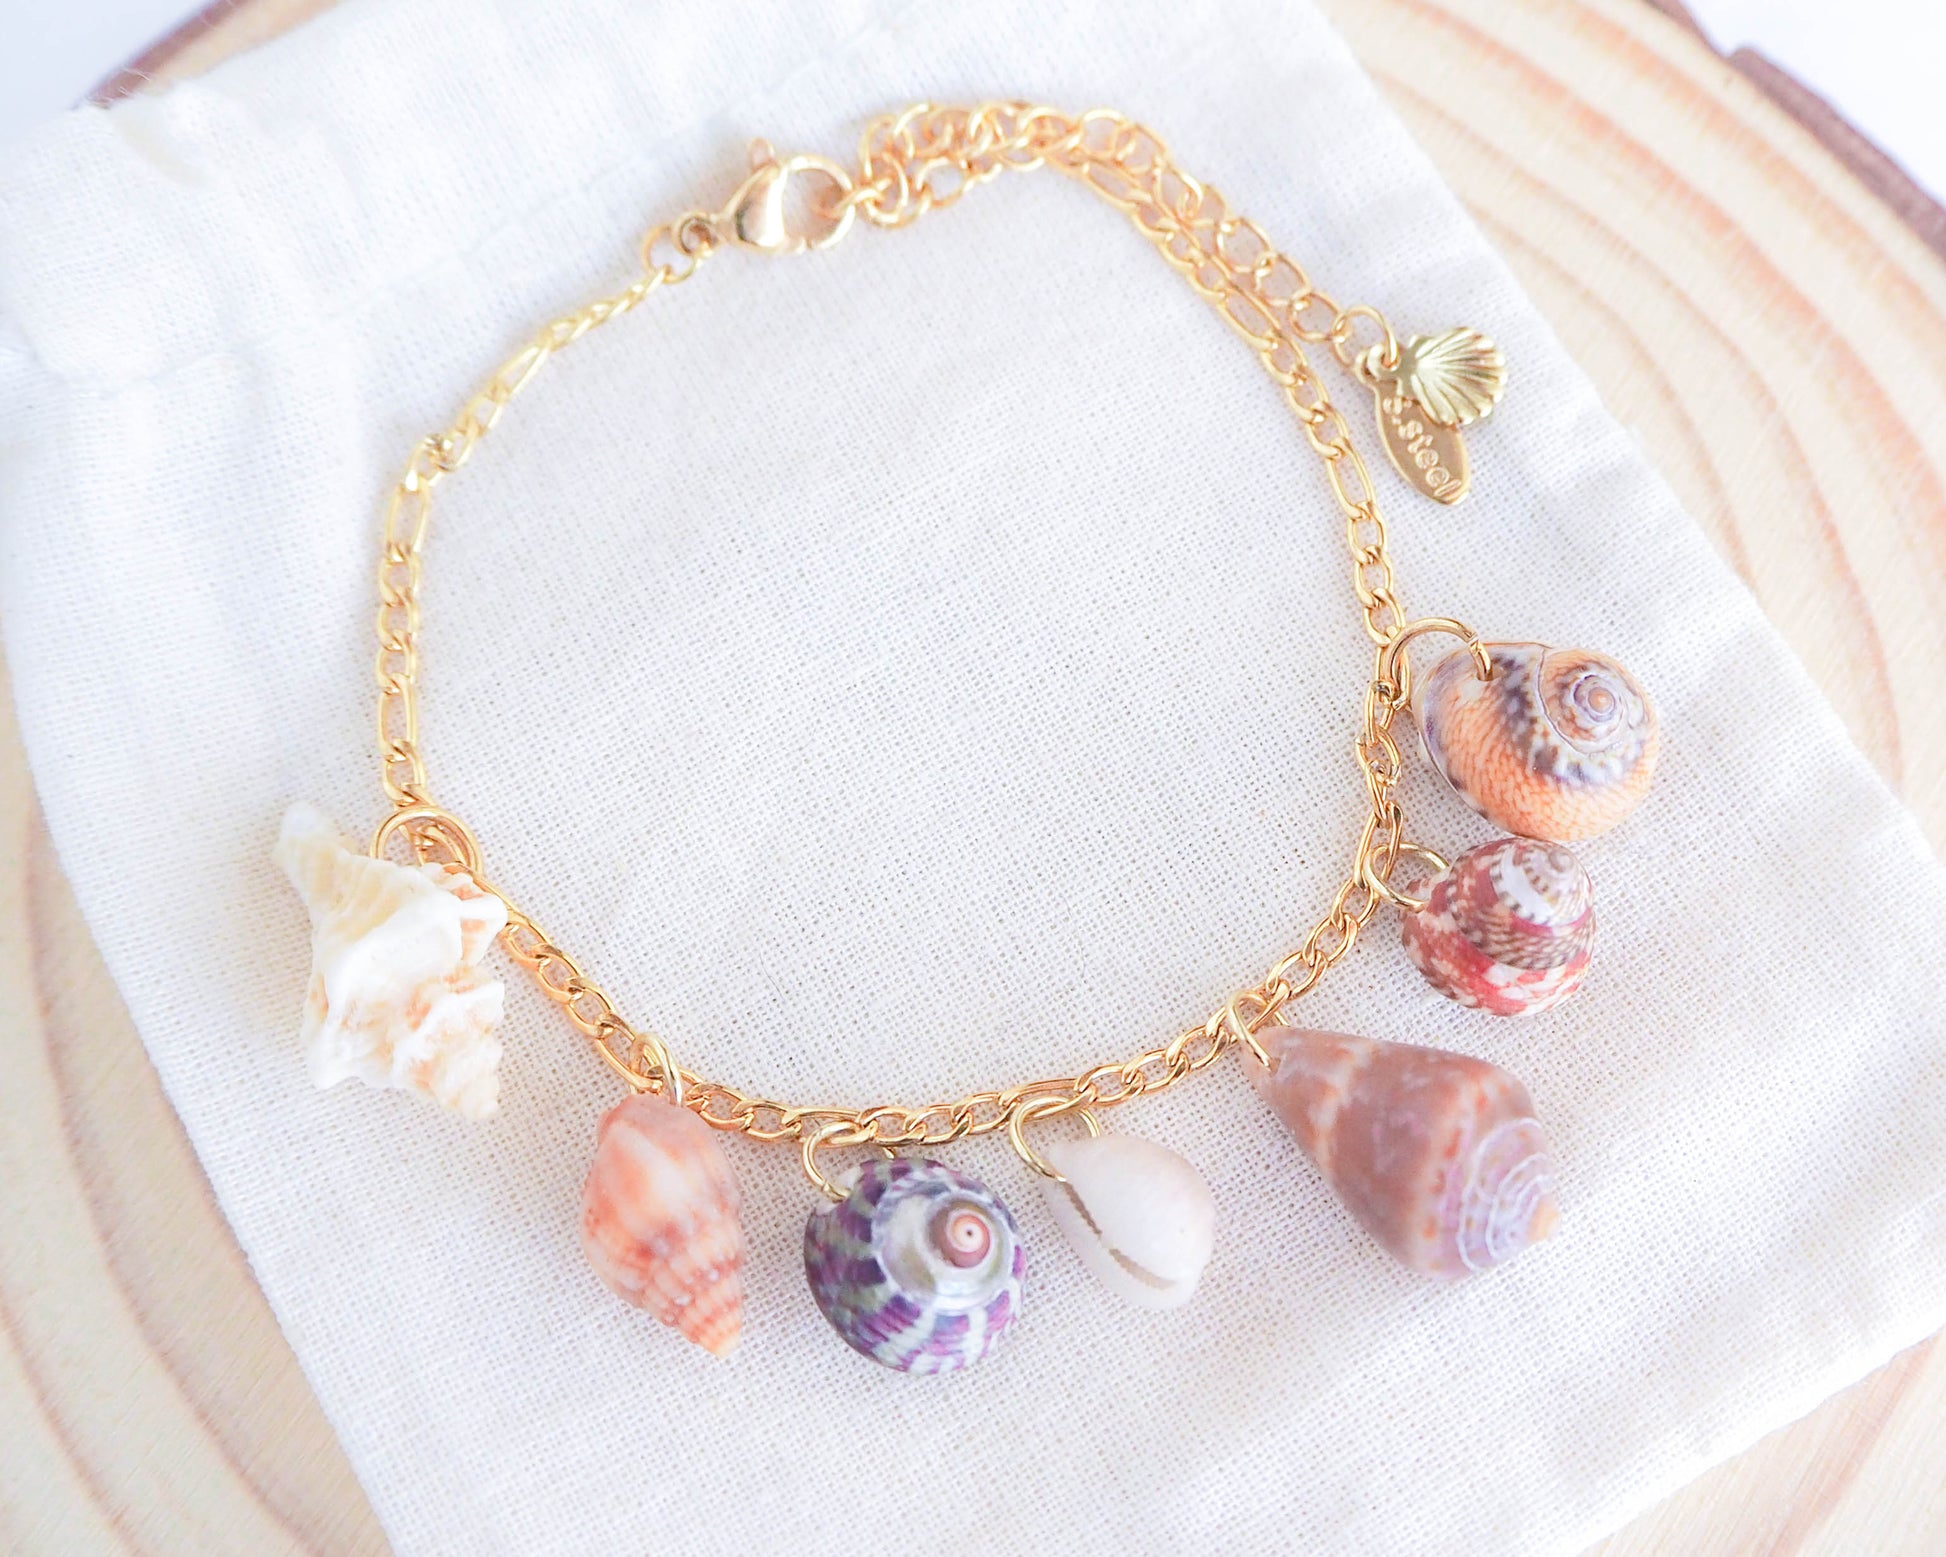 Gold Shell Charm Bracelet with 7 Tiny Shells: ocean-inspired jewelry from Portugal